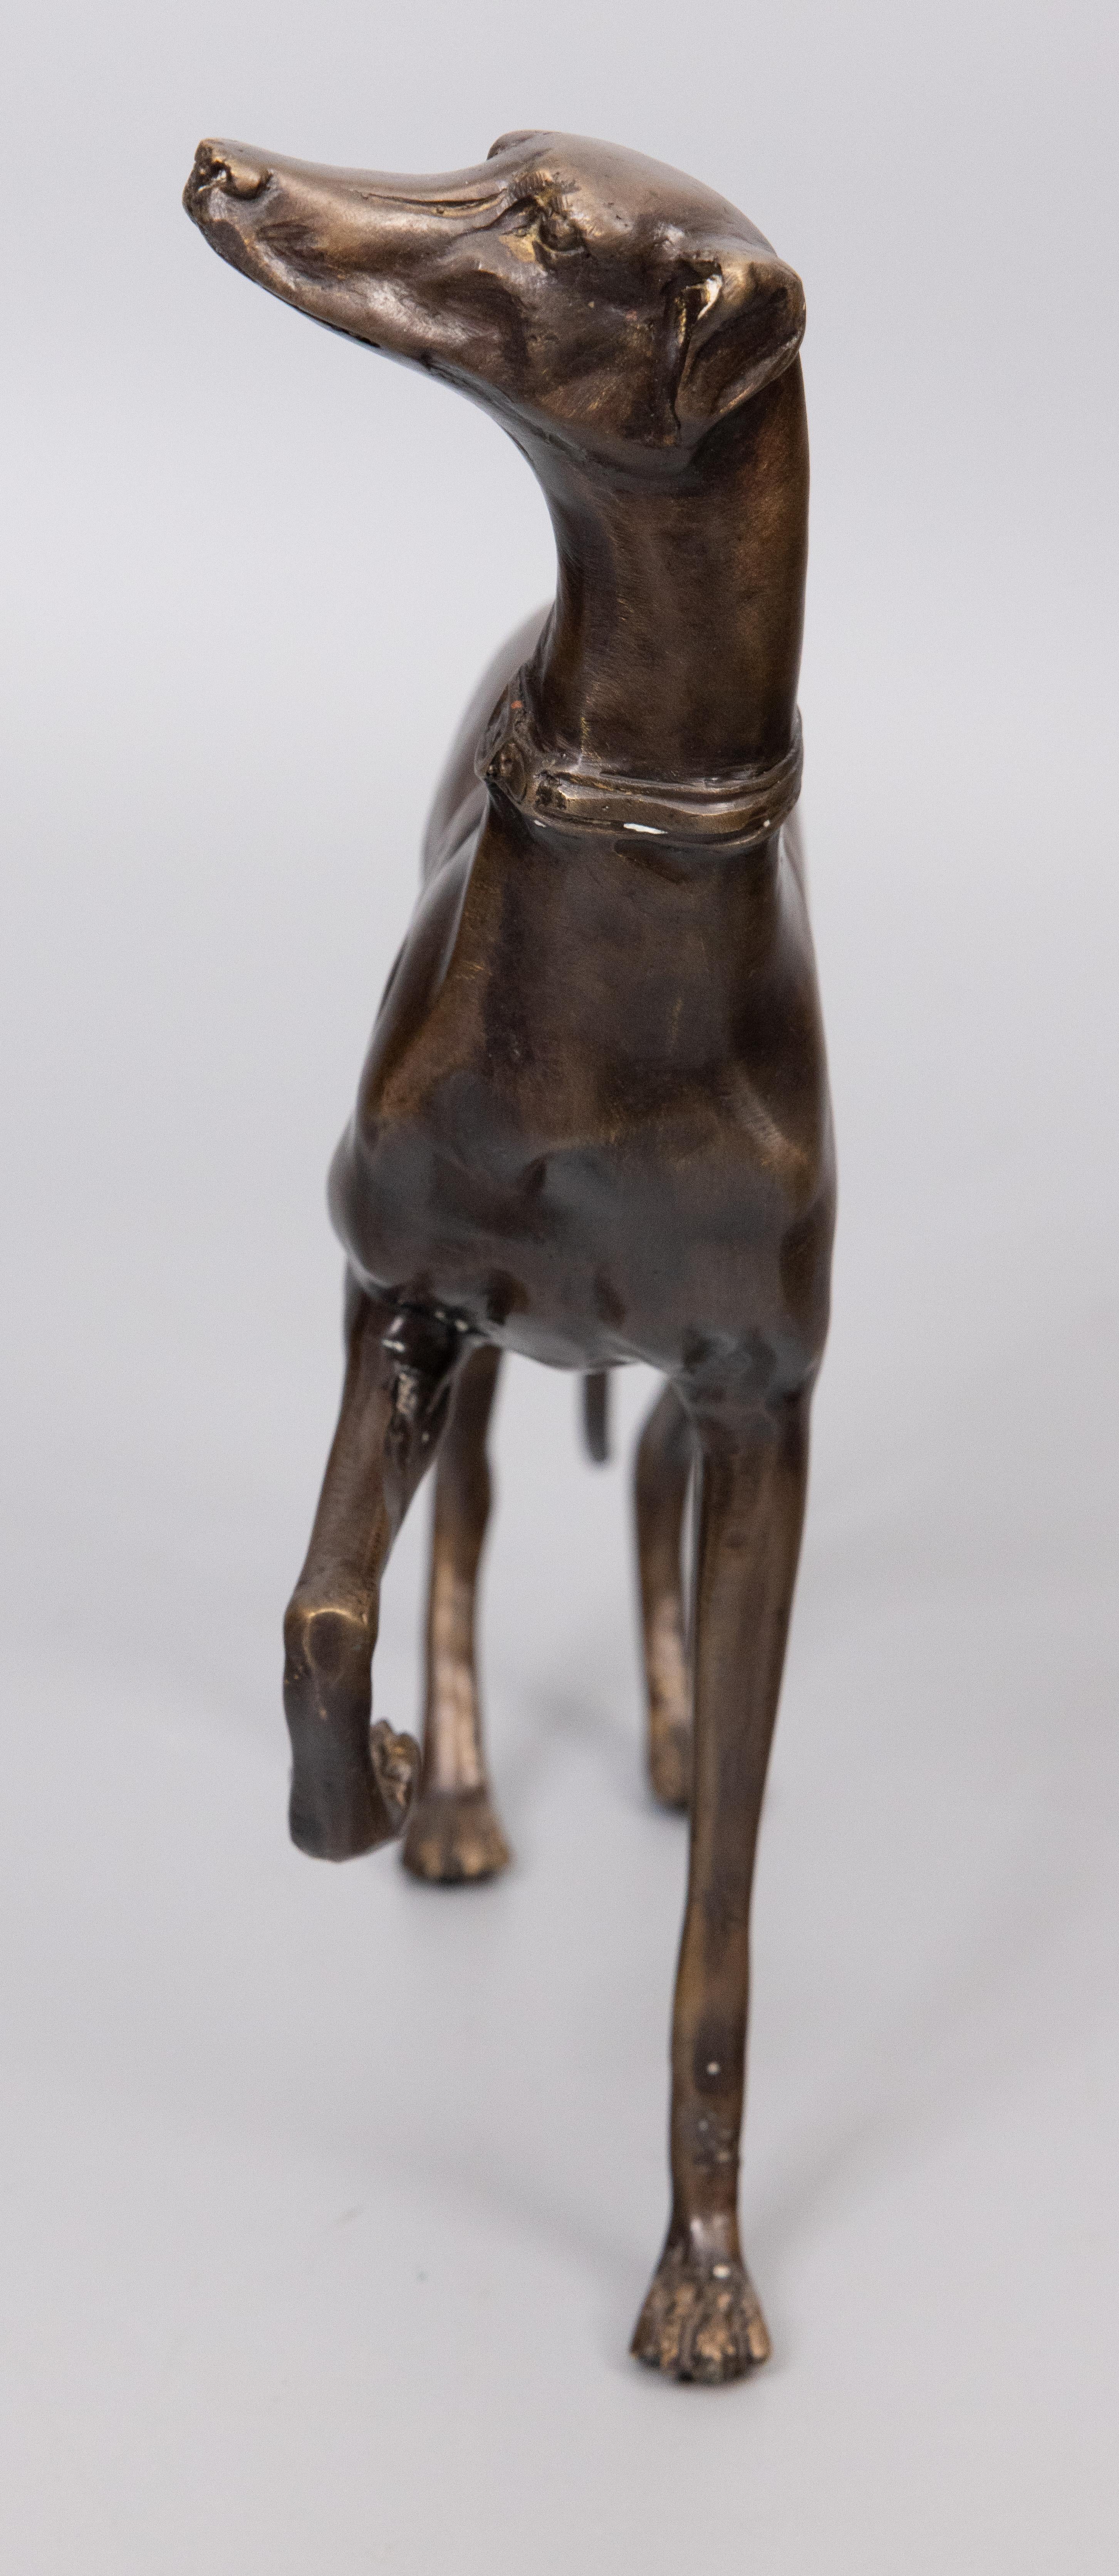 A stately French bronze greyhound whippet dog sculpture figurine, circa 1960. This fine dog has a wonderful expression with great details and a lovely aged bronze patina. It is well made, solid and heavy, and would be a handsome addition to a study